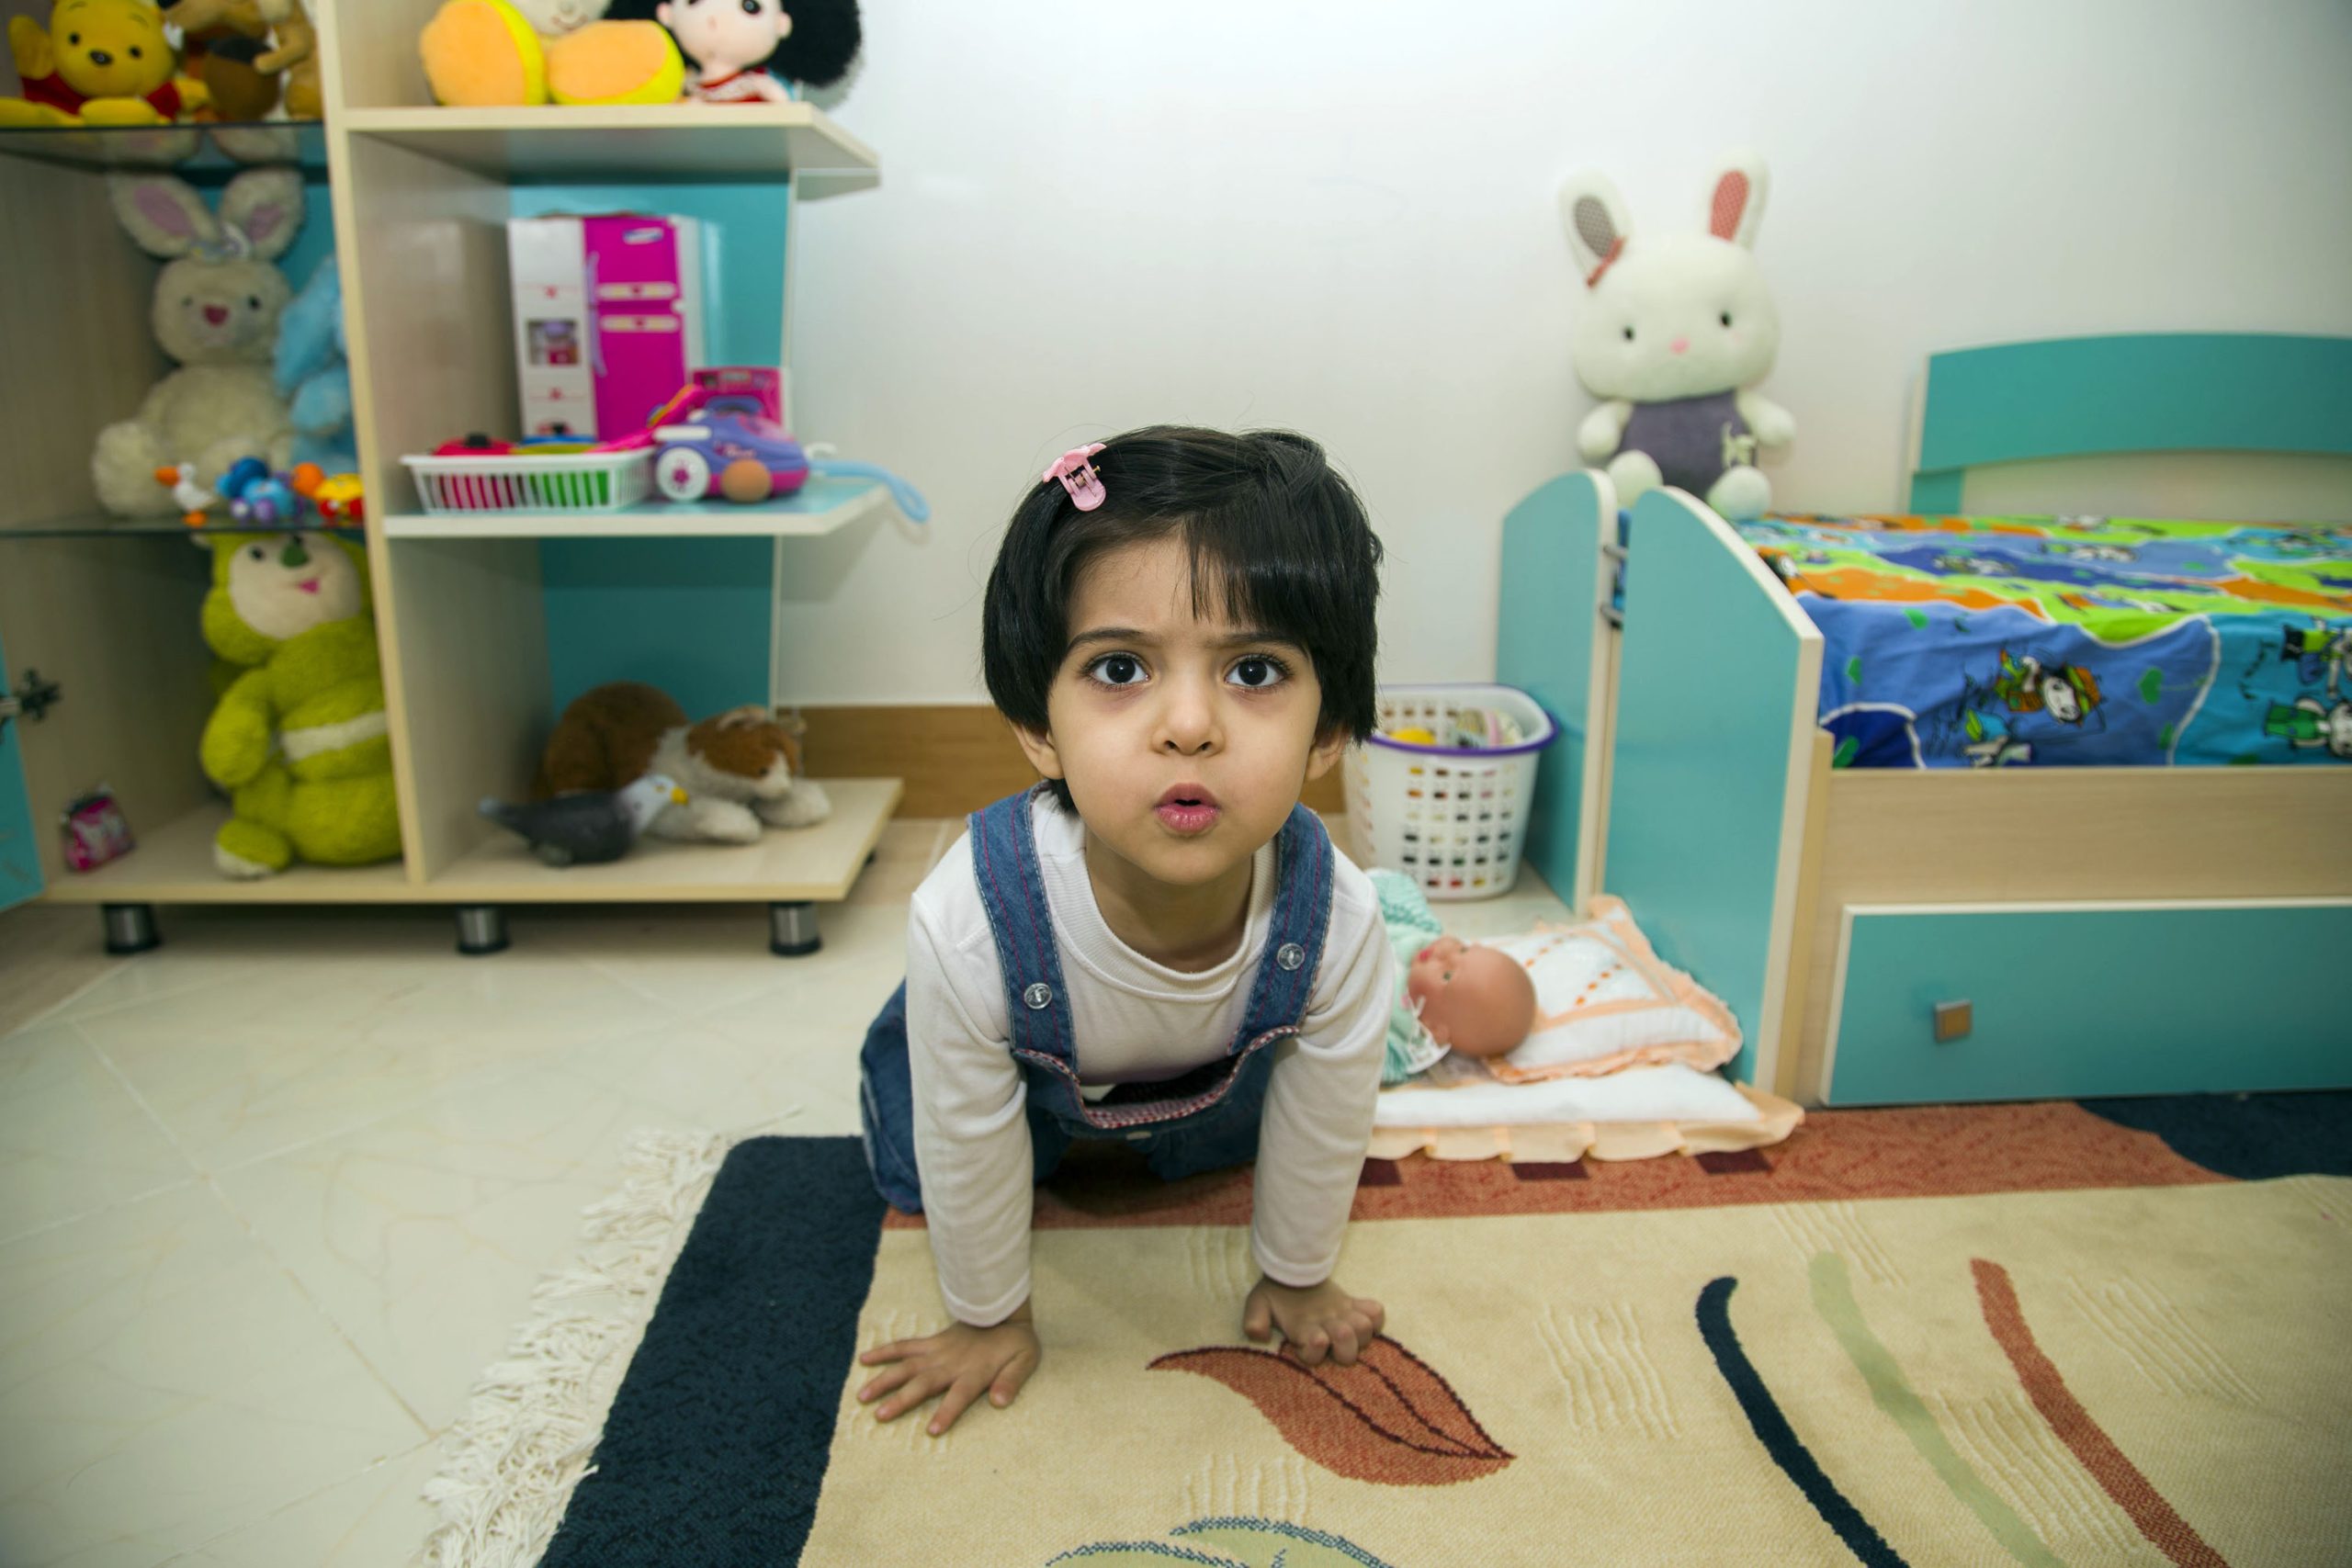 Toddler in a playroom on the floor.